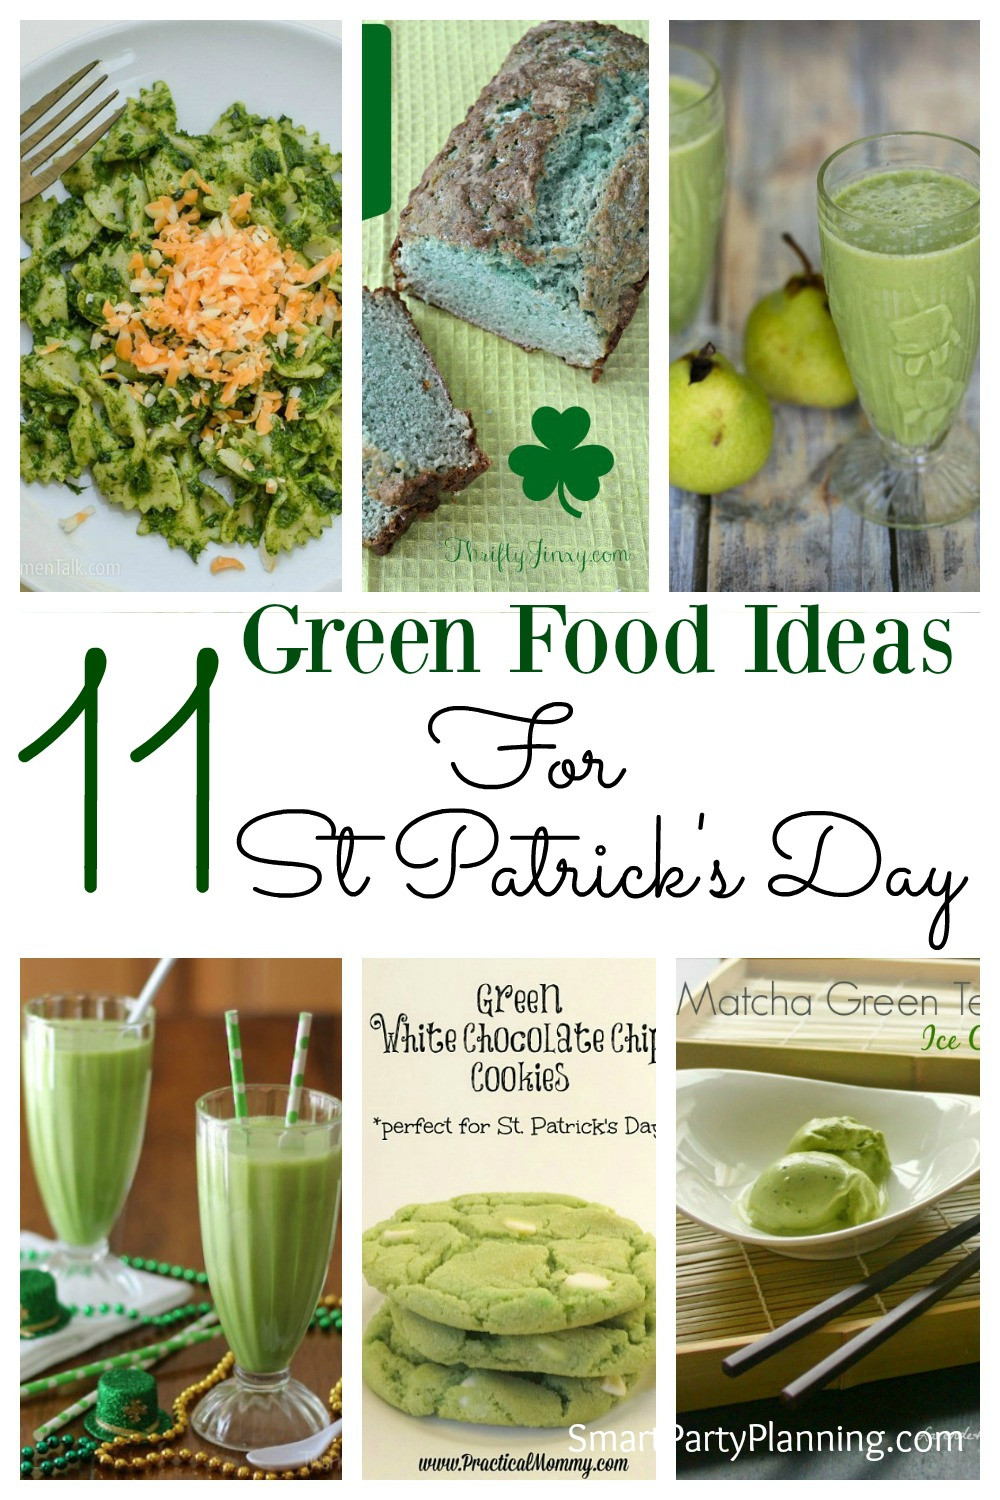 St Patrick's Day Food Ideas
 11 Green Food Ideas For St Patrick s Day